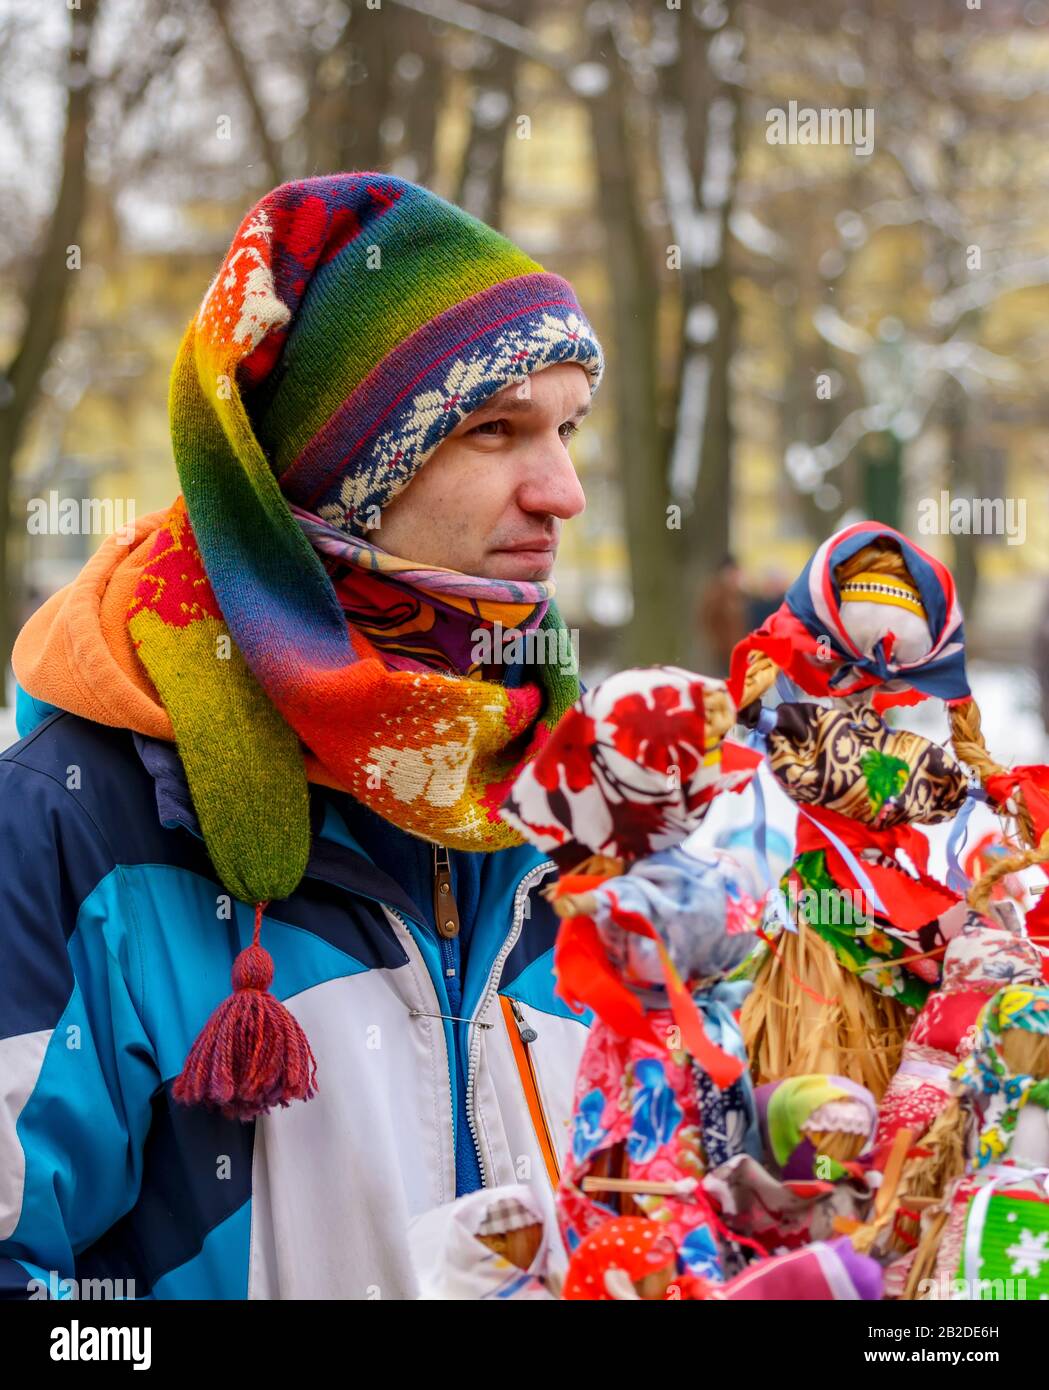 Rabbit Island. St. Petersburg. Russia. 03/01/2020. Celebration of Maslenitsa on the territory of the Peter and Paul Fortress in St. Petersburg. Stock Photo